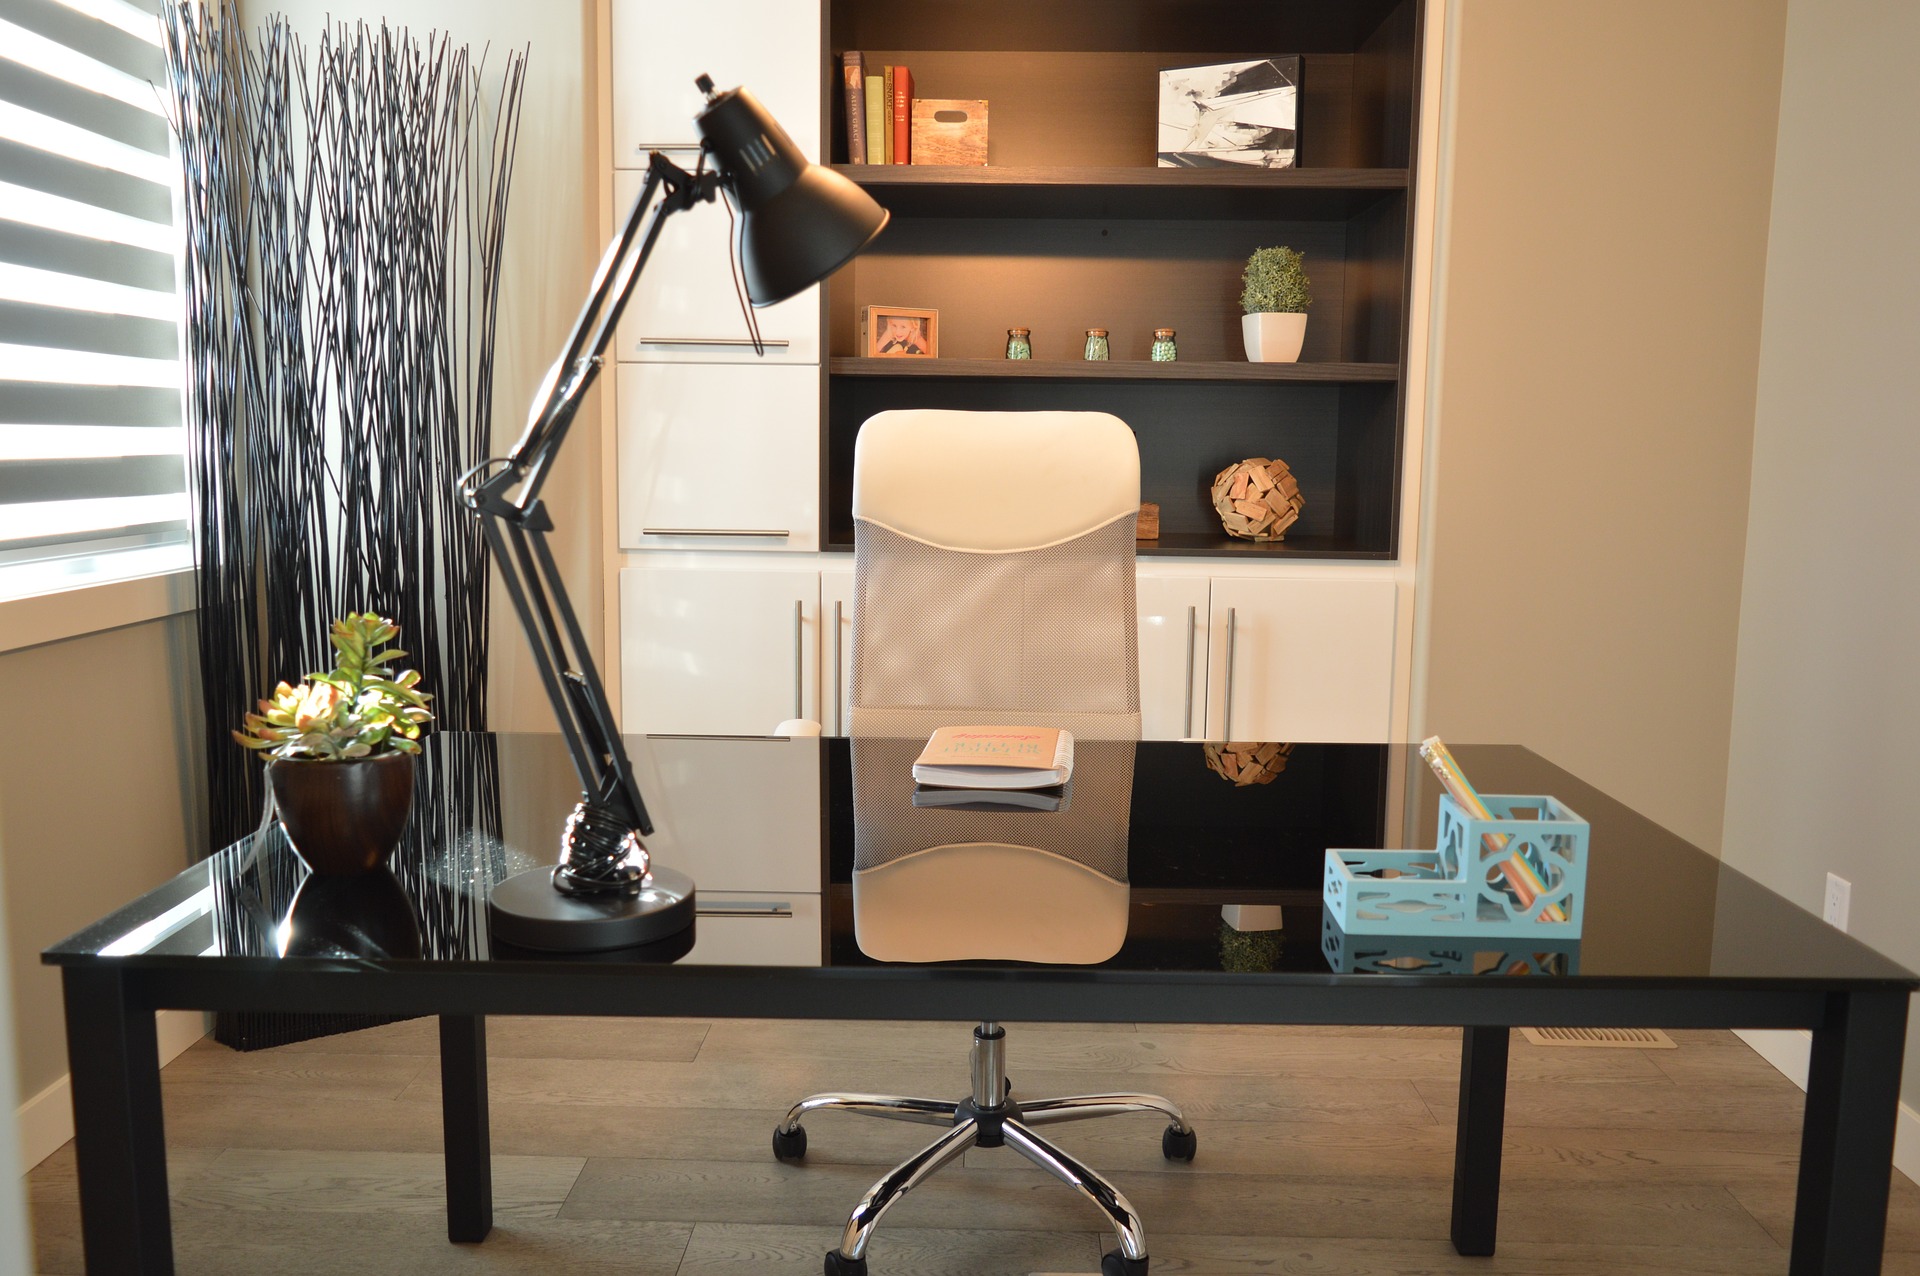 Should You Buy New or Refurbished Office Furniture